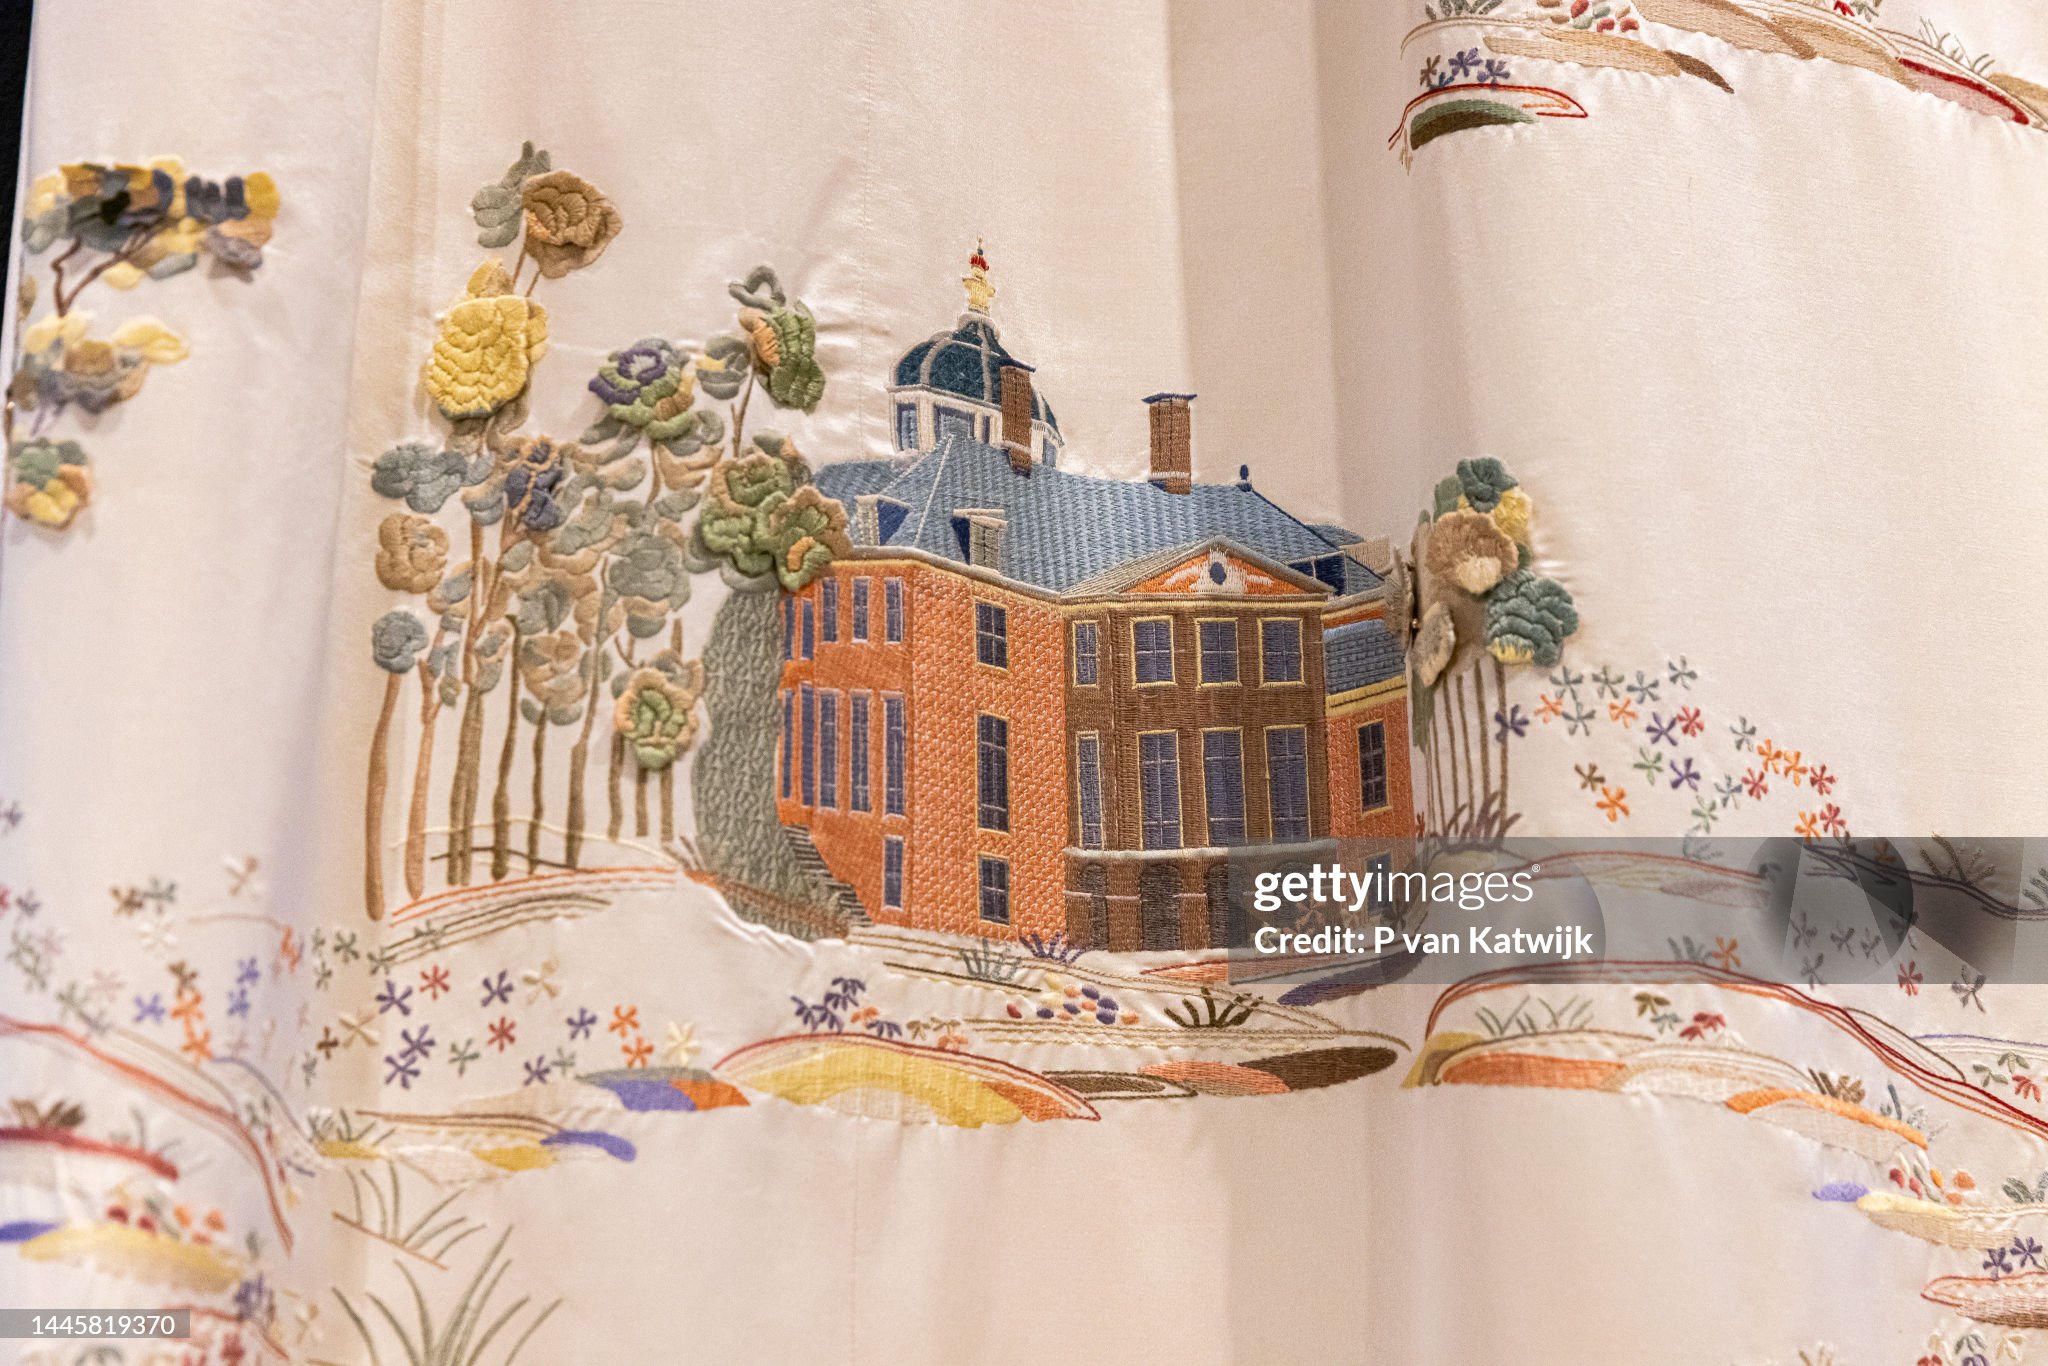 queen-maxima-of-the-netherlands-visits-textile-museum-to-present-her-new-curtains-for-palace.jpg?s=2048x2048&w=gi&k=20&c=gum44YkeXy_26QSrxbc9c7zjXlkVy78KM0G2HhY8MlE=